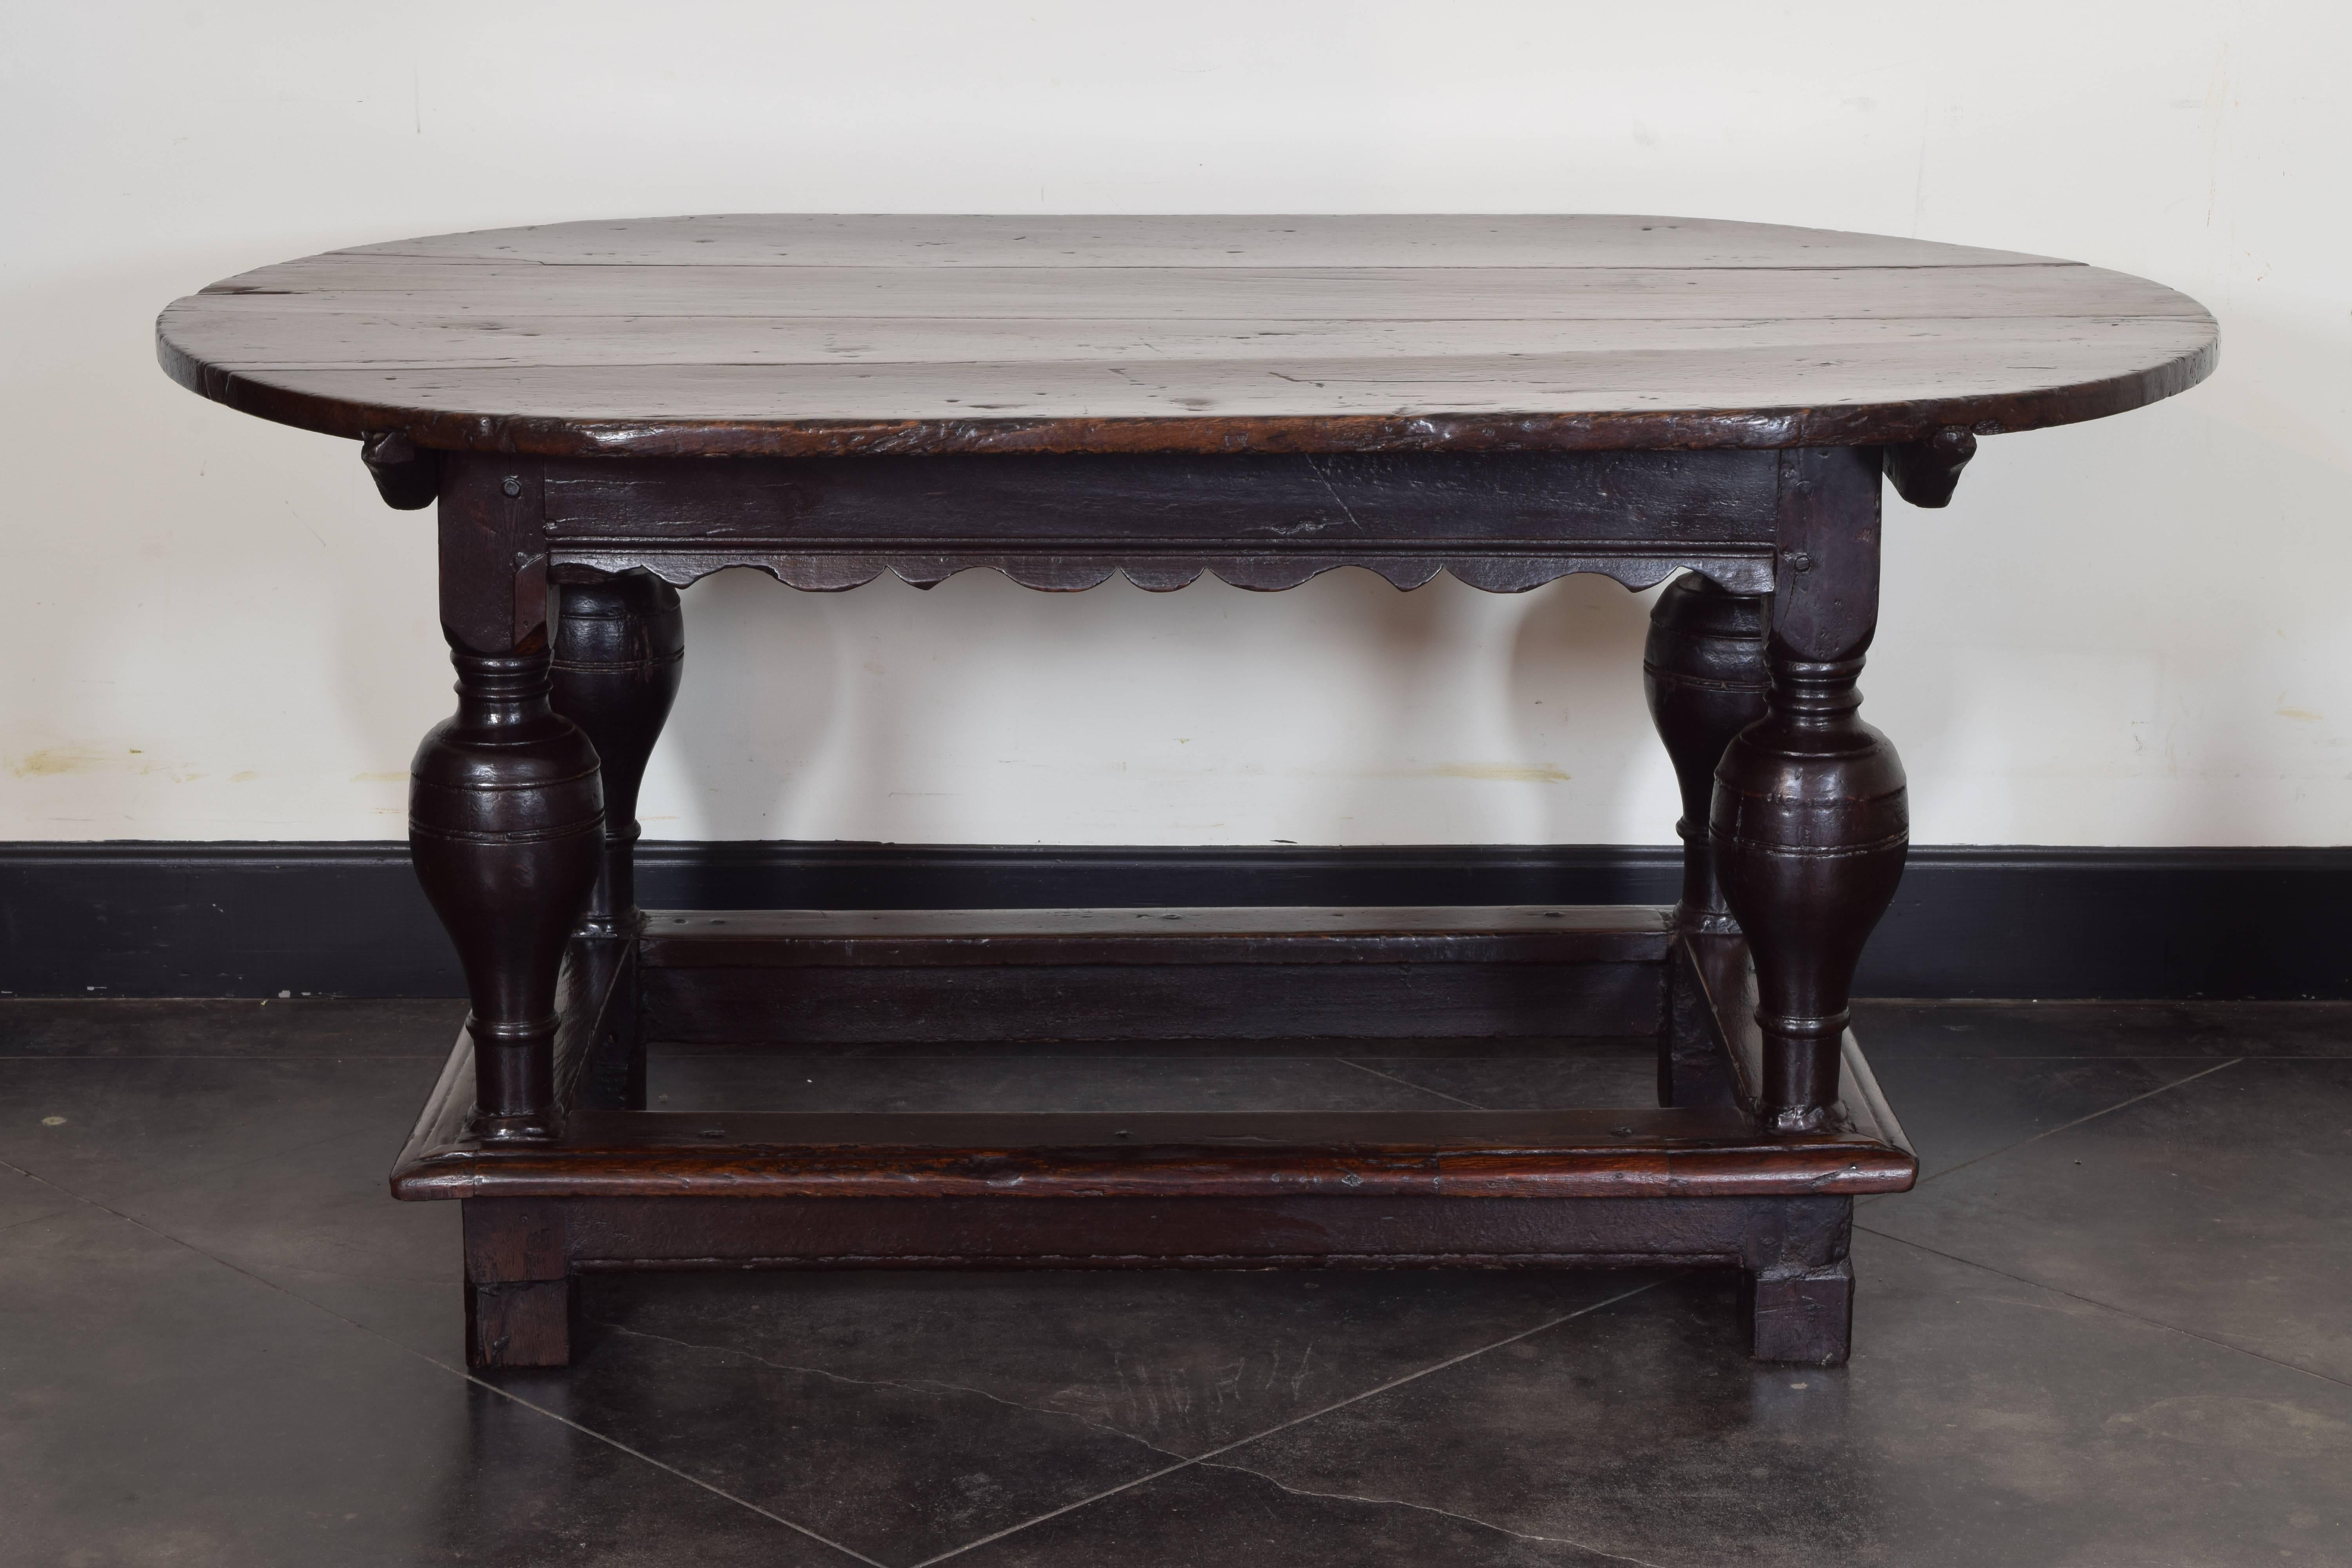 Having a four board oval top with a shaped apron, raised on baluster form columnar legs joined by a molded edge rectangular apron, the legs continuing to square block feet.